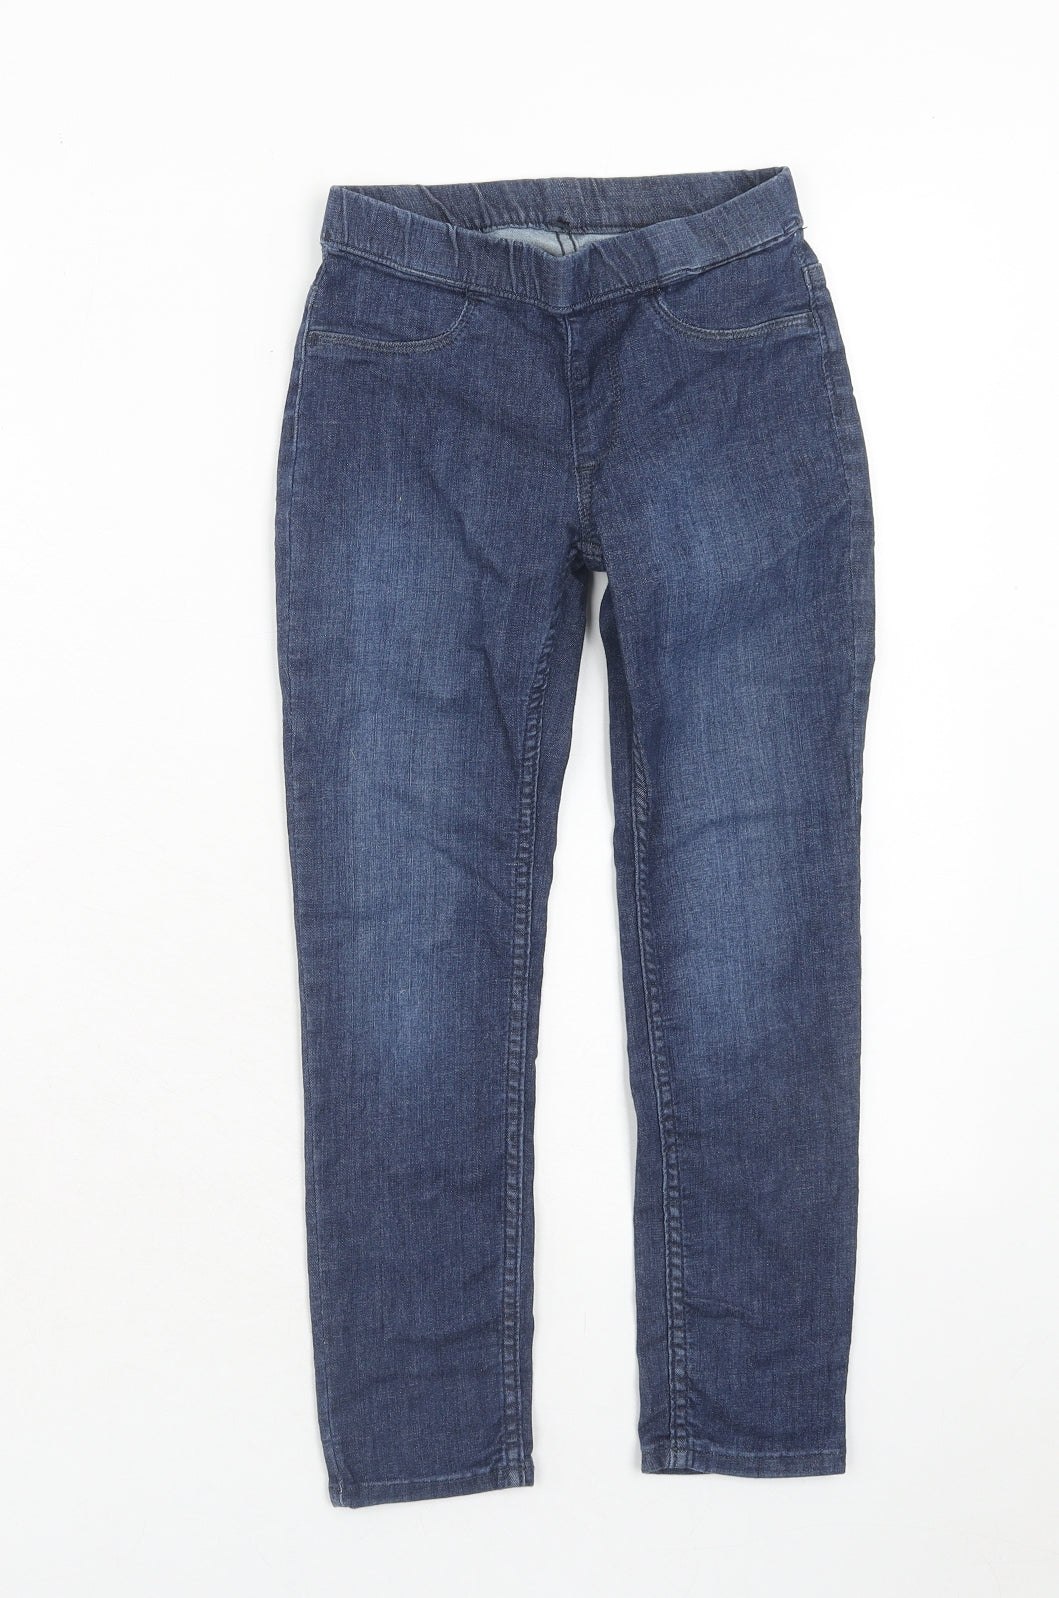 H&M Girls Blue Cotton Skinny Jeans Size 6-7 Years Regular Pullover